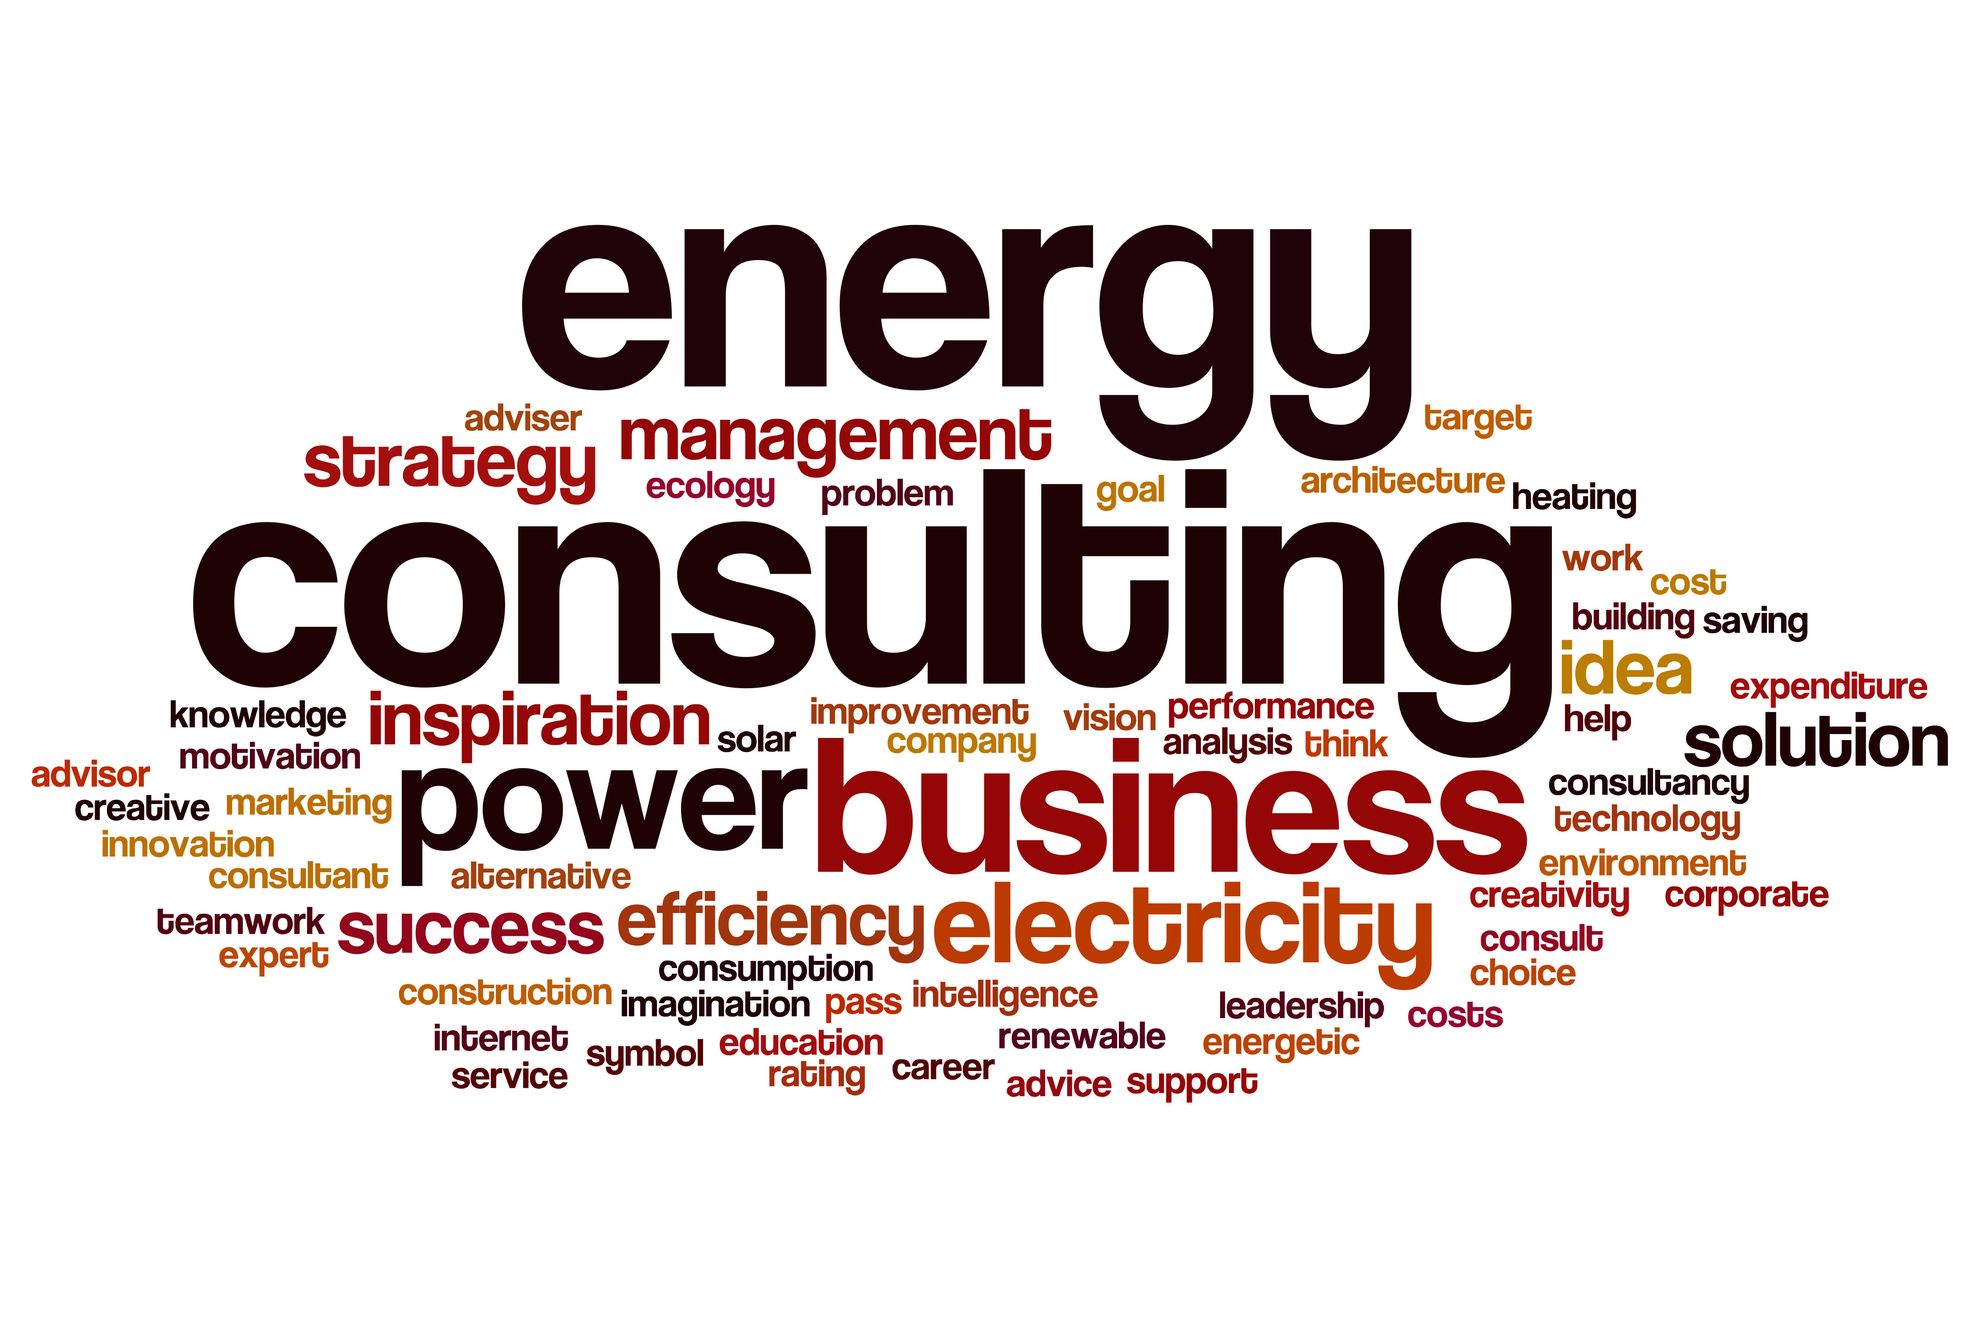 Energy consultants have deep and esoteric knowledge of the energy industry